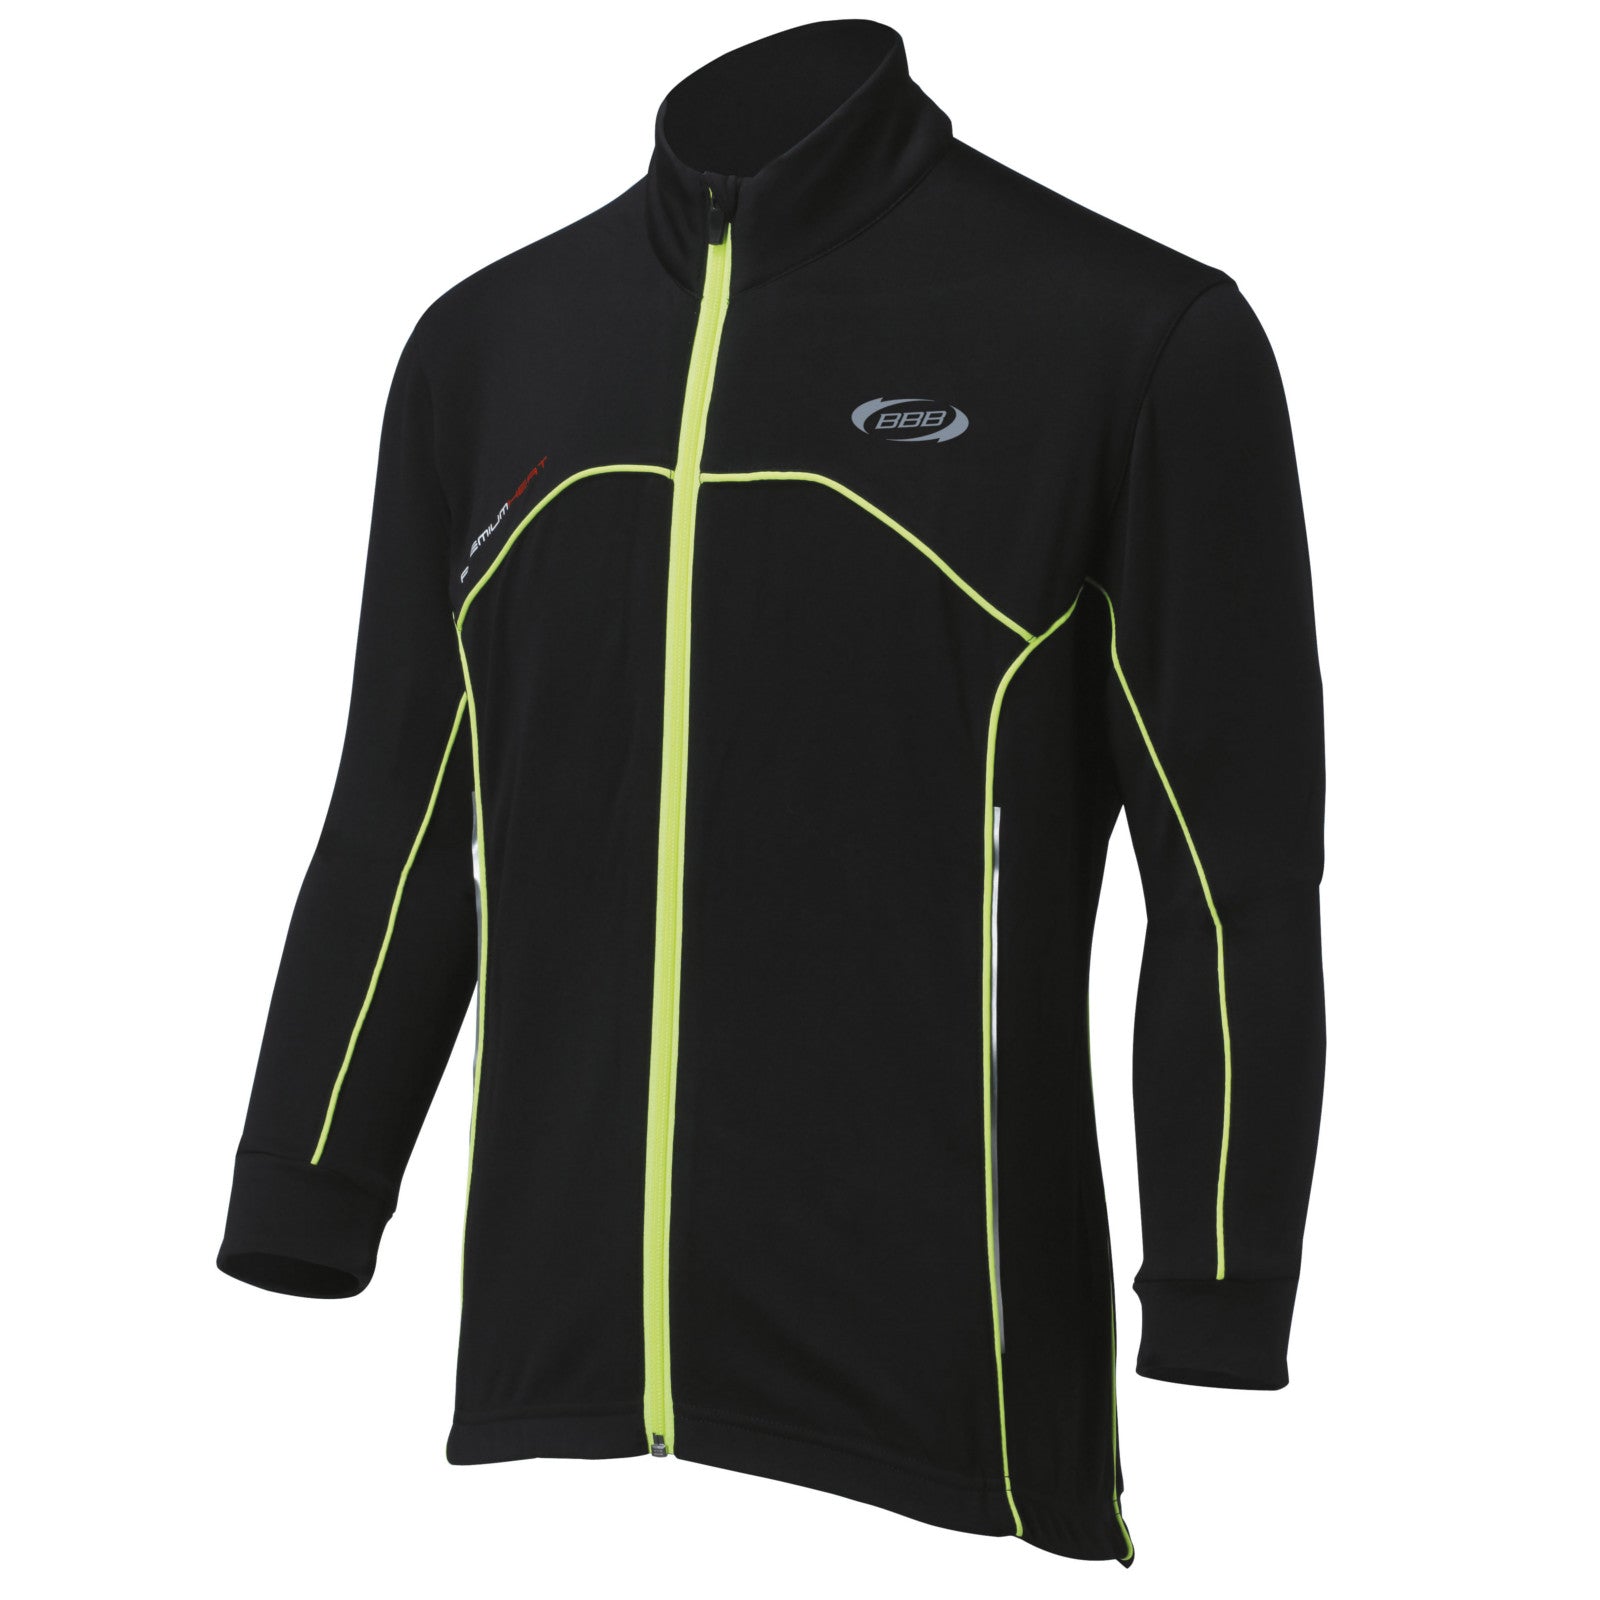 BBB Easyshield Men's Windproof Cycling Jacket Large